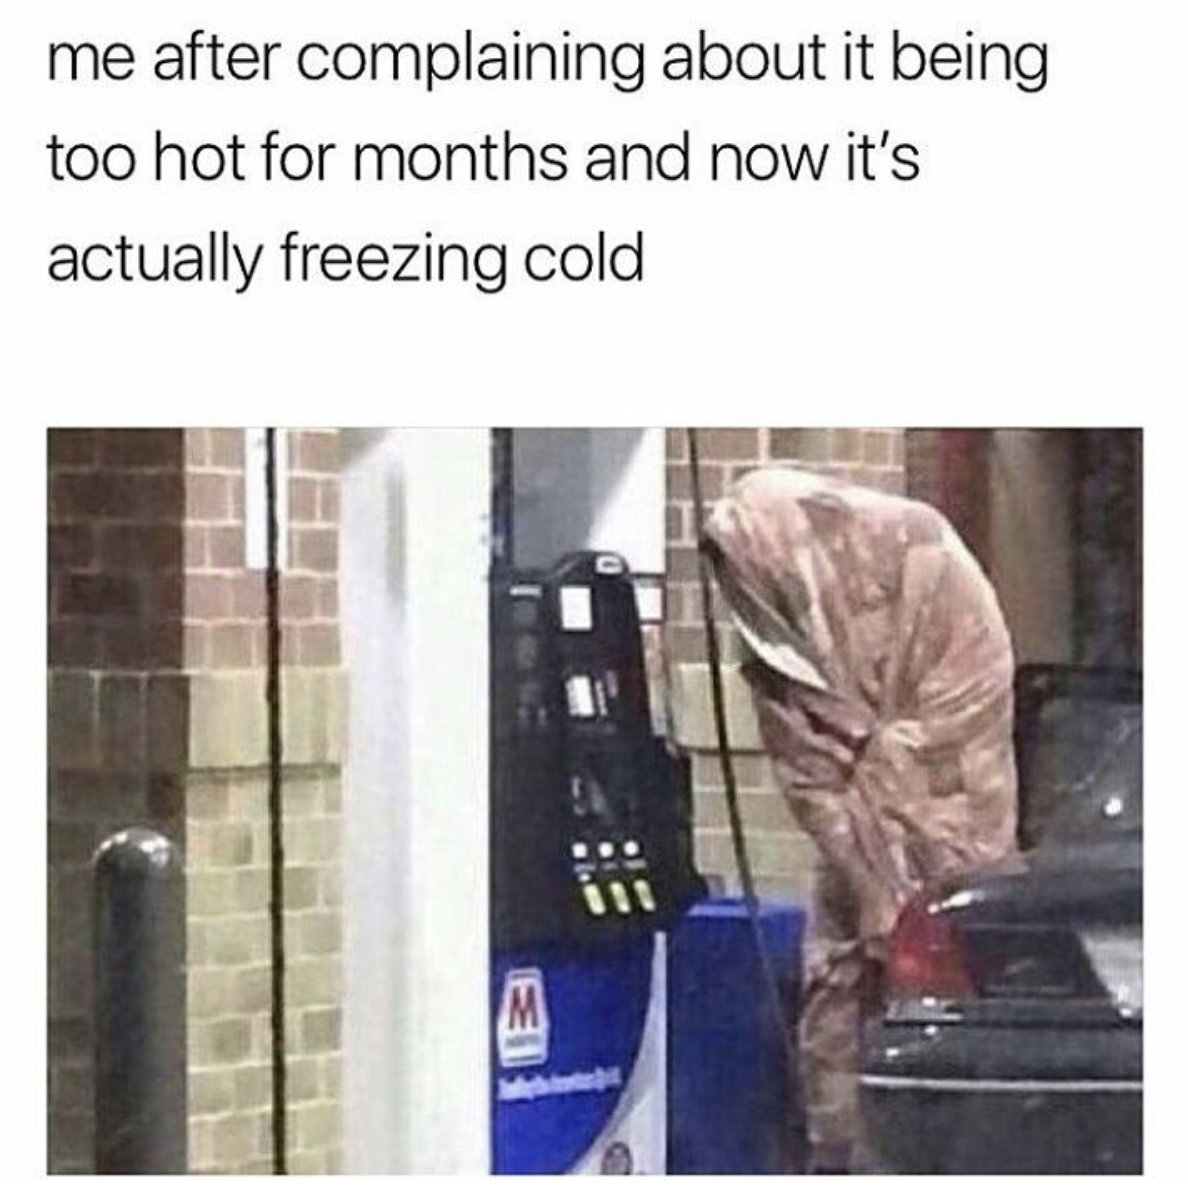 it's too cold memes - me after complaining about it being too hot for months and now it's actually freezing cold